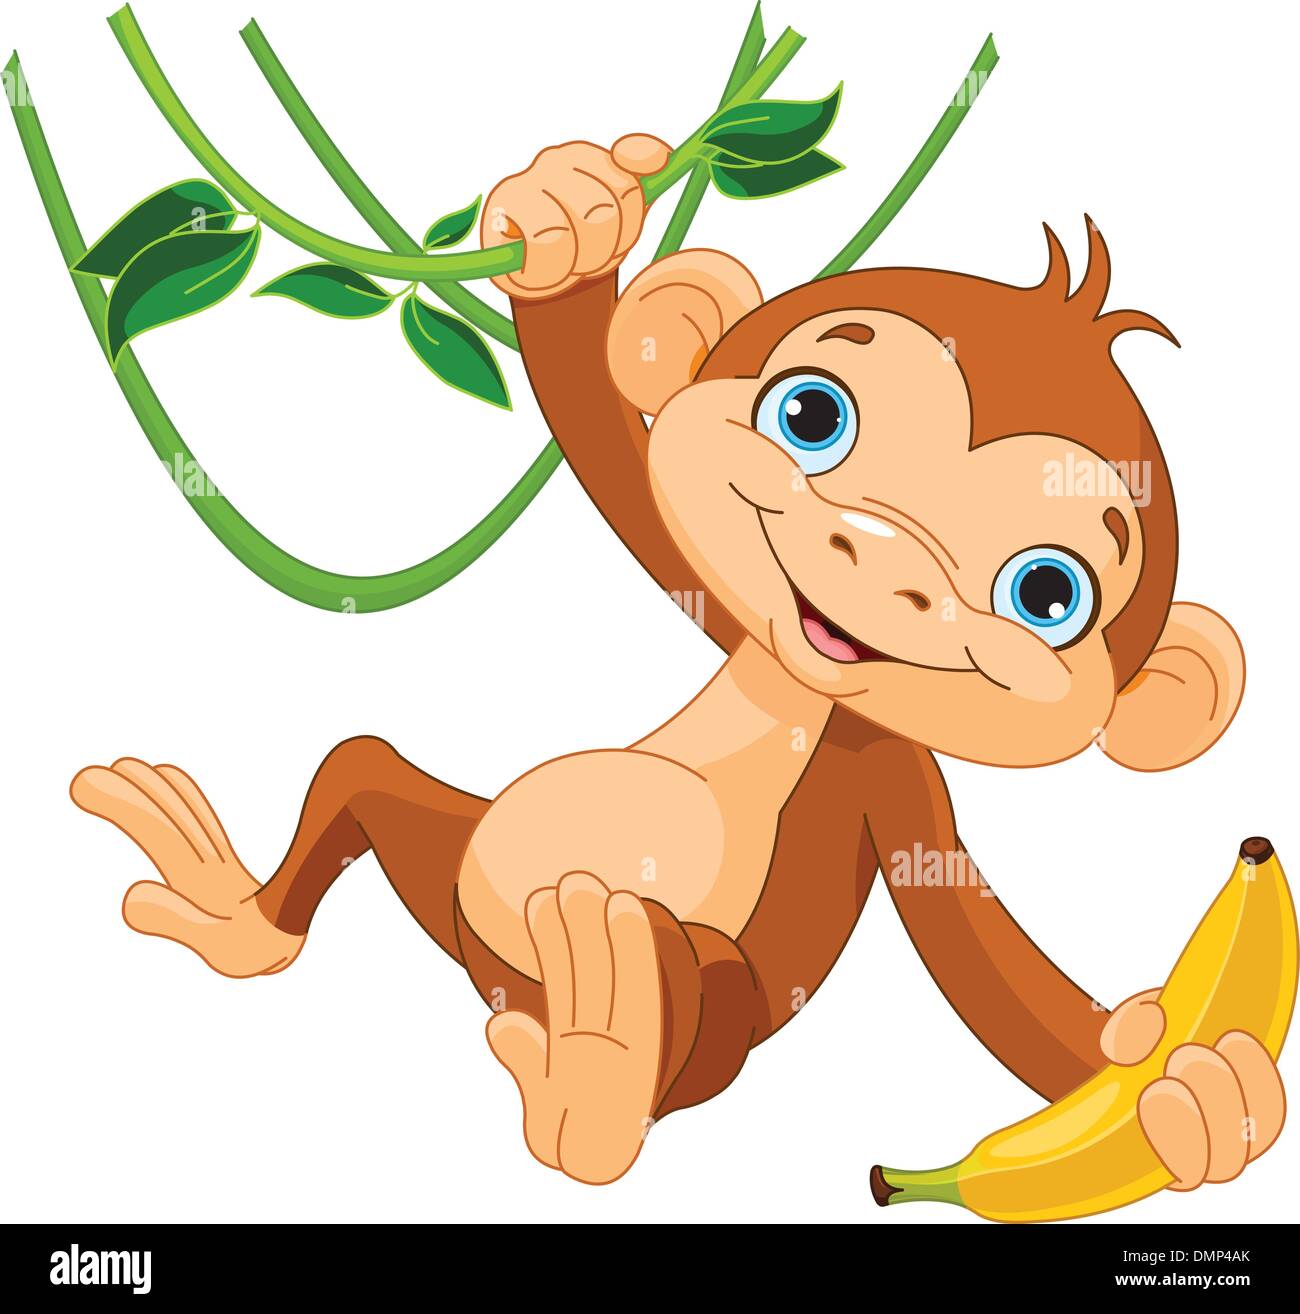 Cartoon tree character Stock Vector Images - Alamy